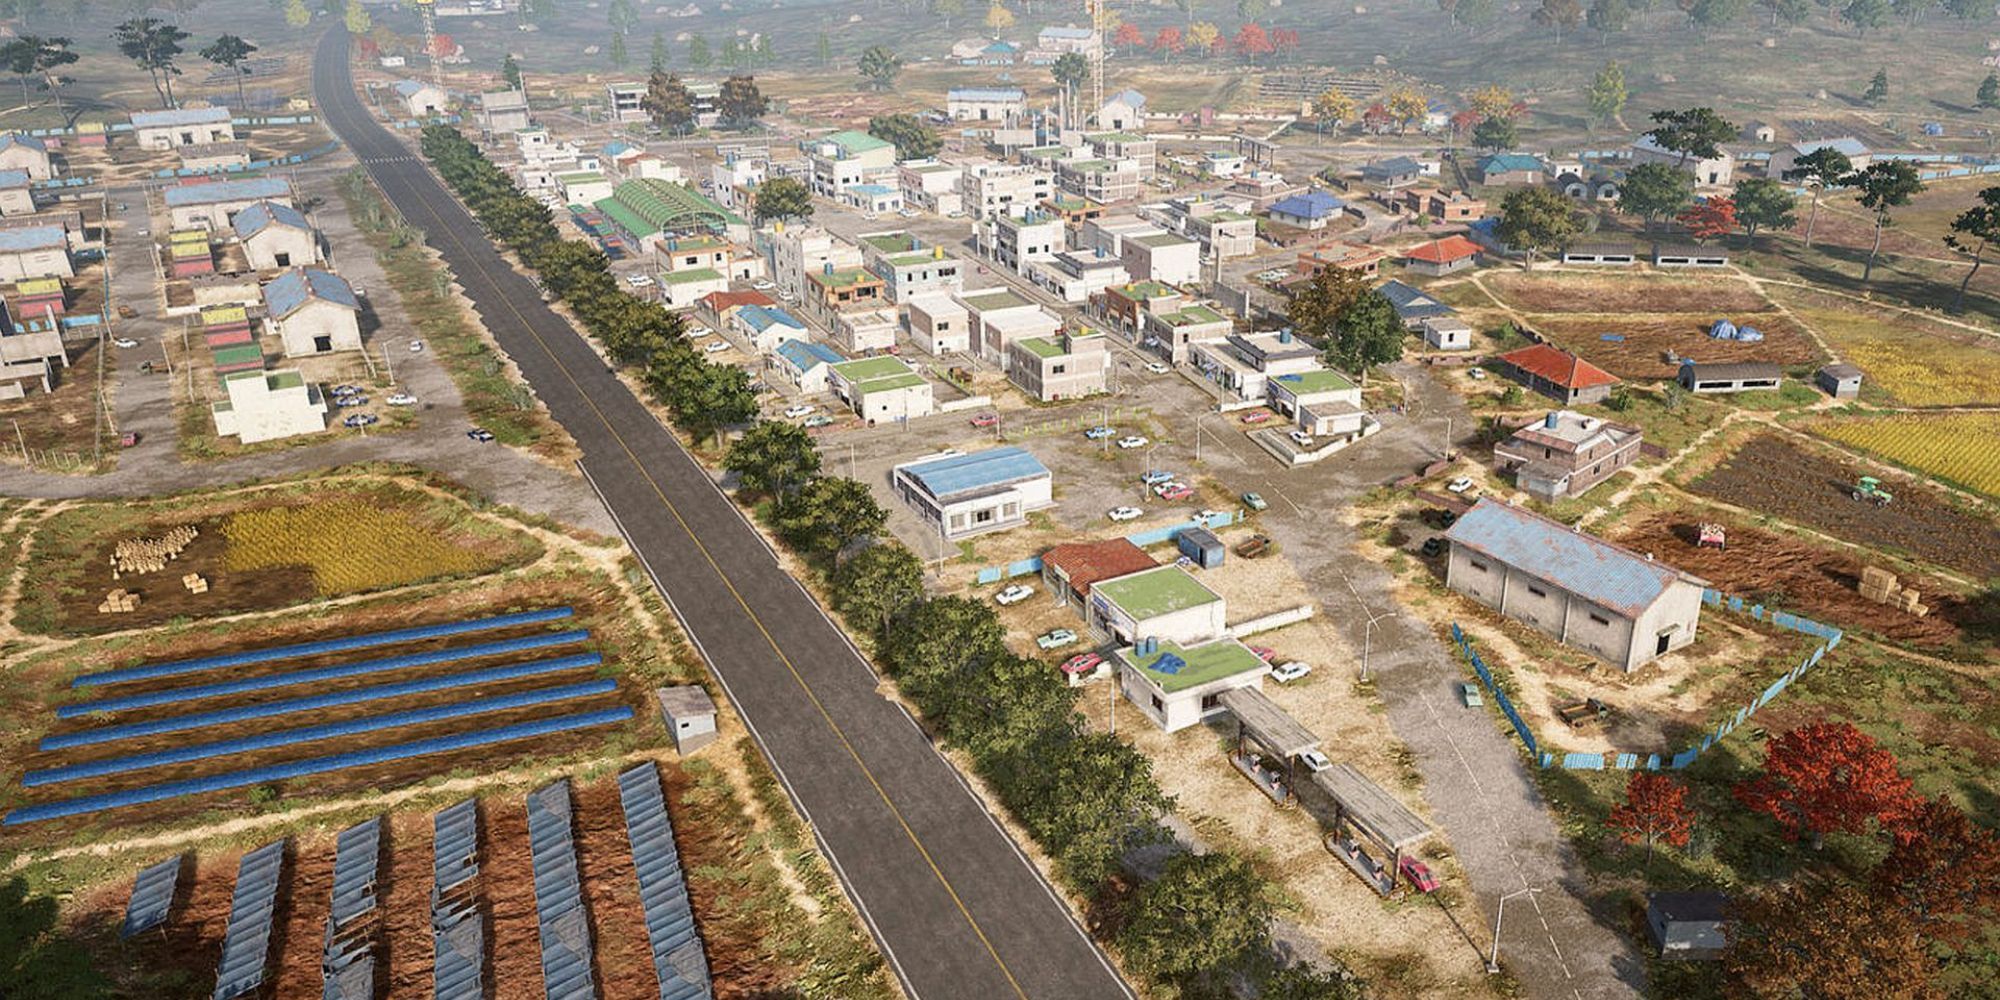 PUBG Taego Town From Aerial View